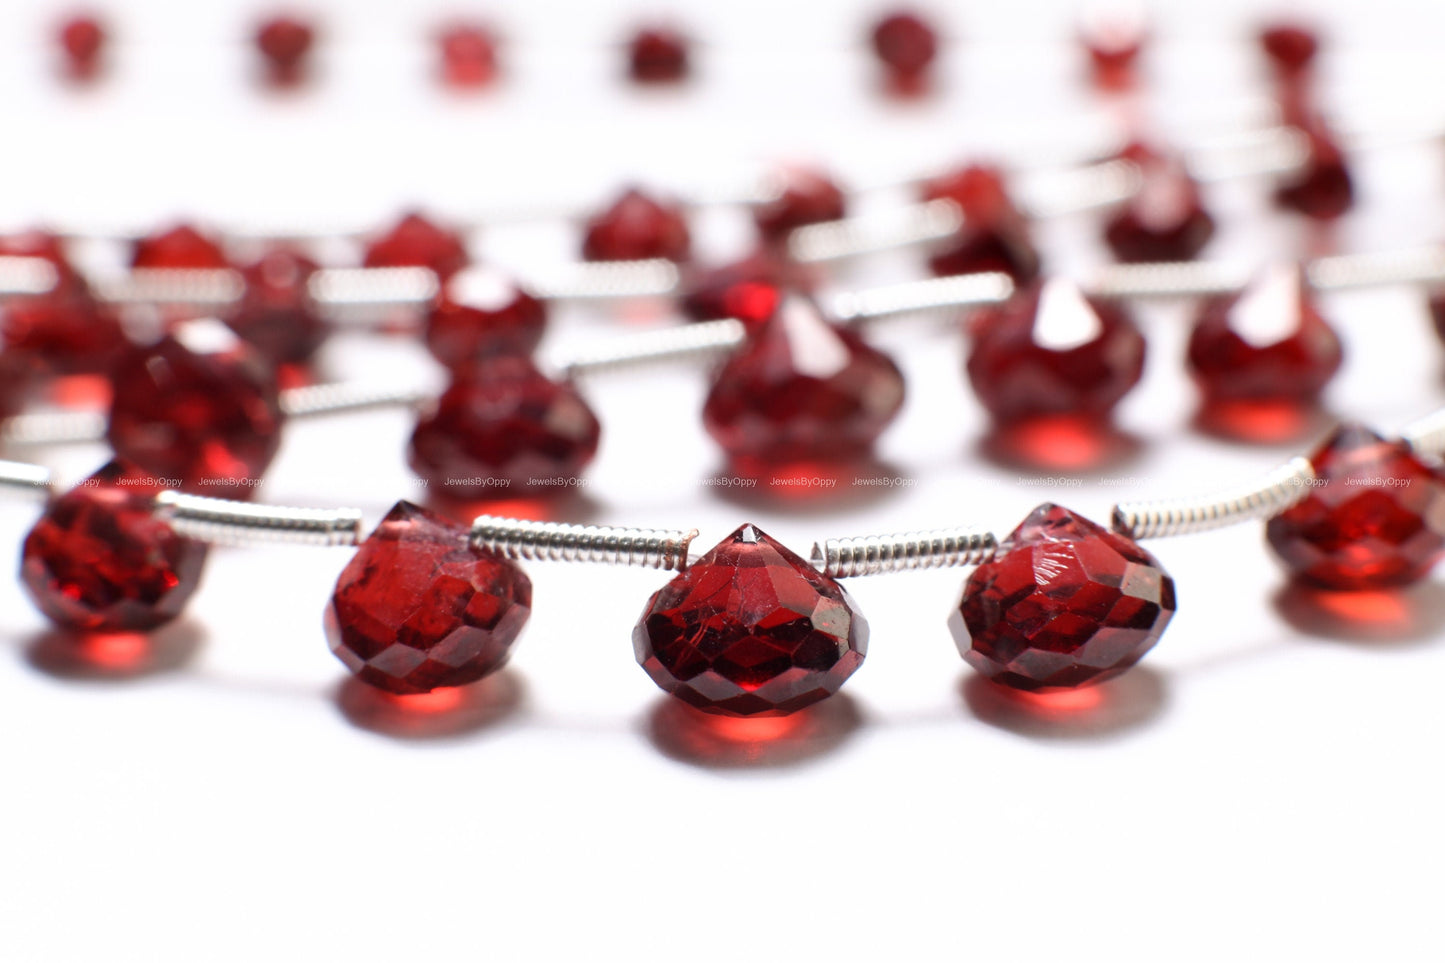 Mozambique Garnet AAA Micro Faceted Onion Drop 4.5-7.5mm , Jewelry Making Rich Dark Red Cut gems,January Birthstone, 6, 12 pieces St,